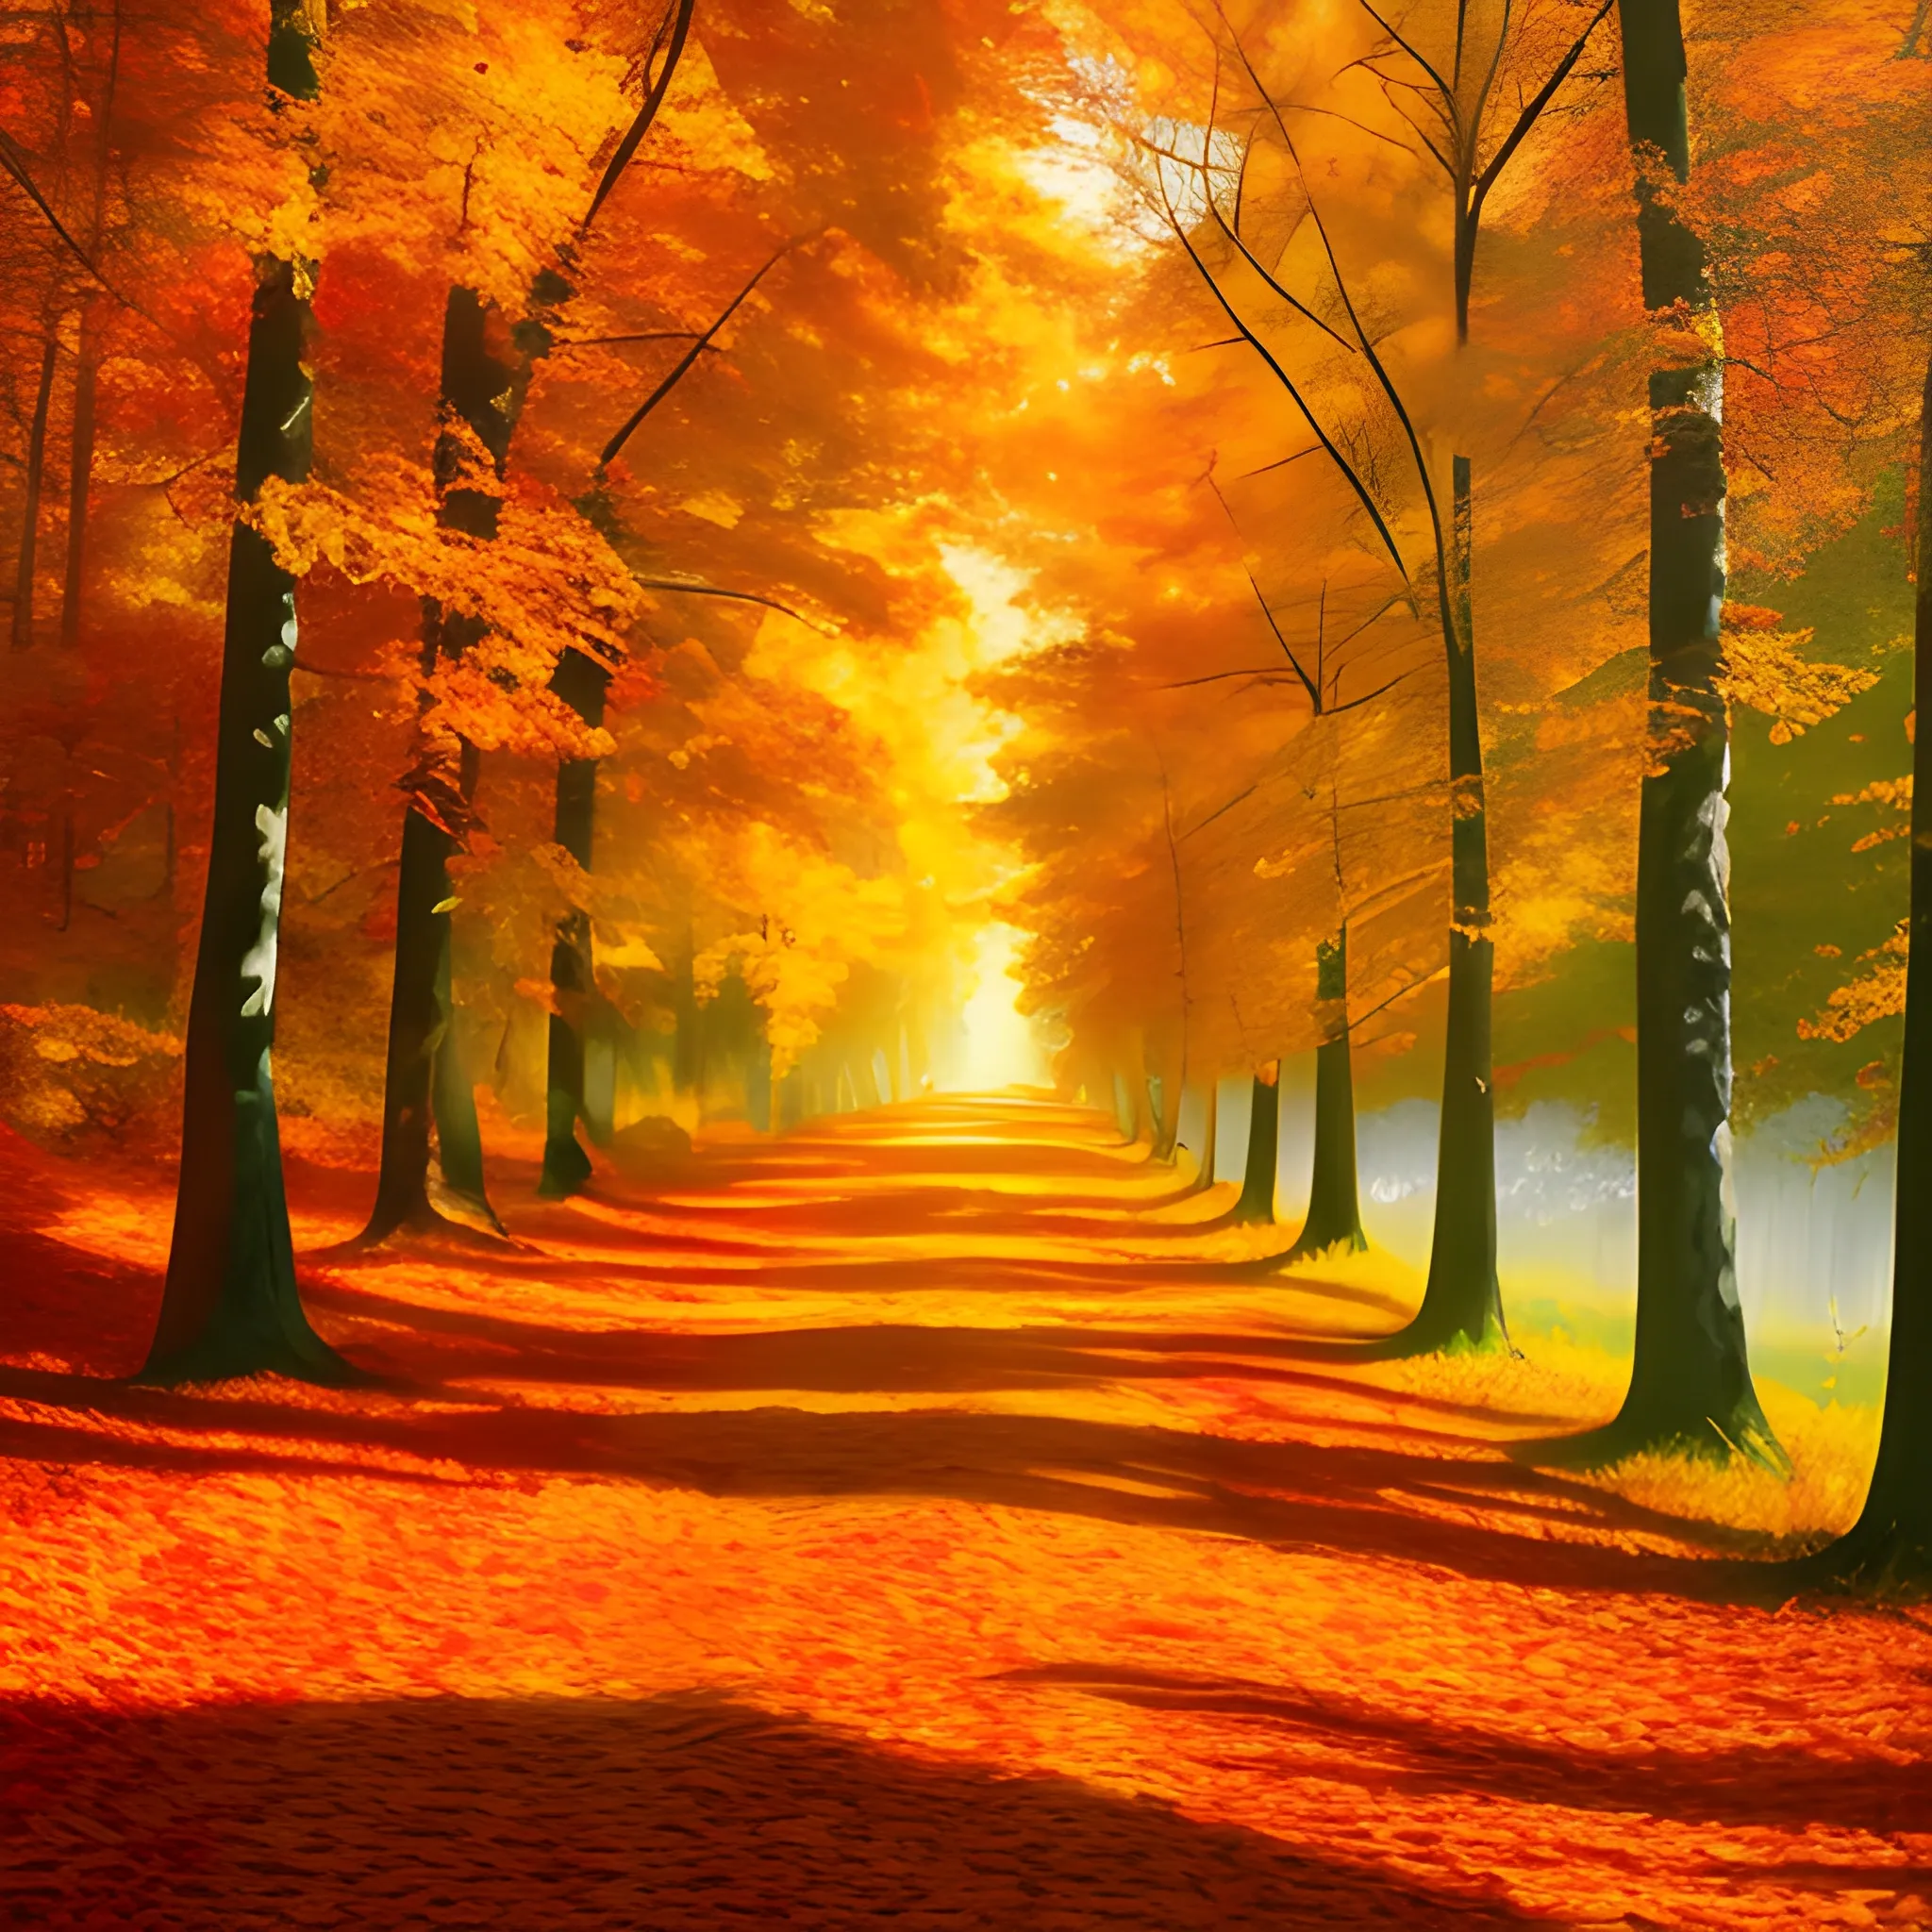 "Vibrant and enchanting autumn landscapes, capturing the true beauty of fall, rich golden hues, fiery red and orange leaves, crisp cool air, scenic countryside or forest trails, sunlight filtering through the foliage, a sense of nostalgia and warmth, a picturesque scene that celebrates the wonders of the season.", Trippy